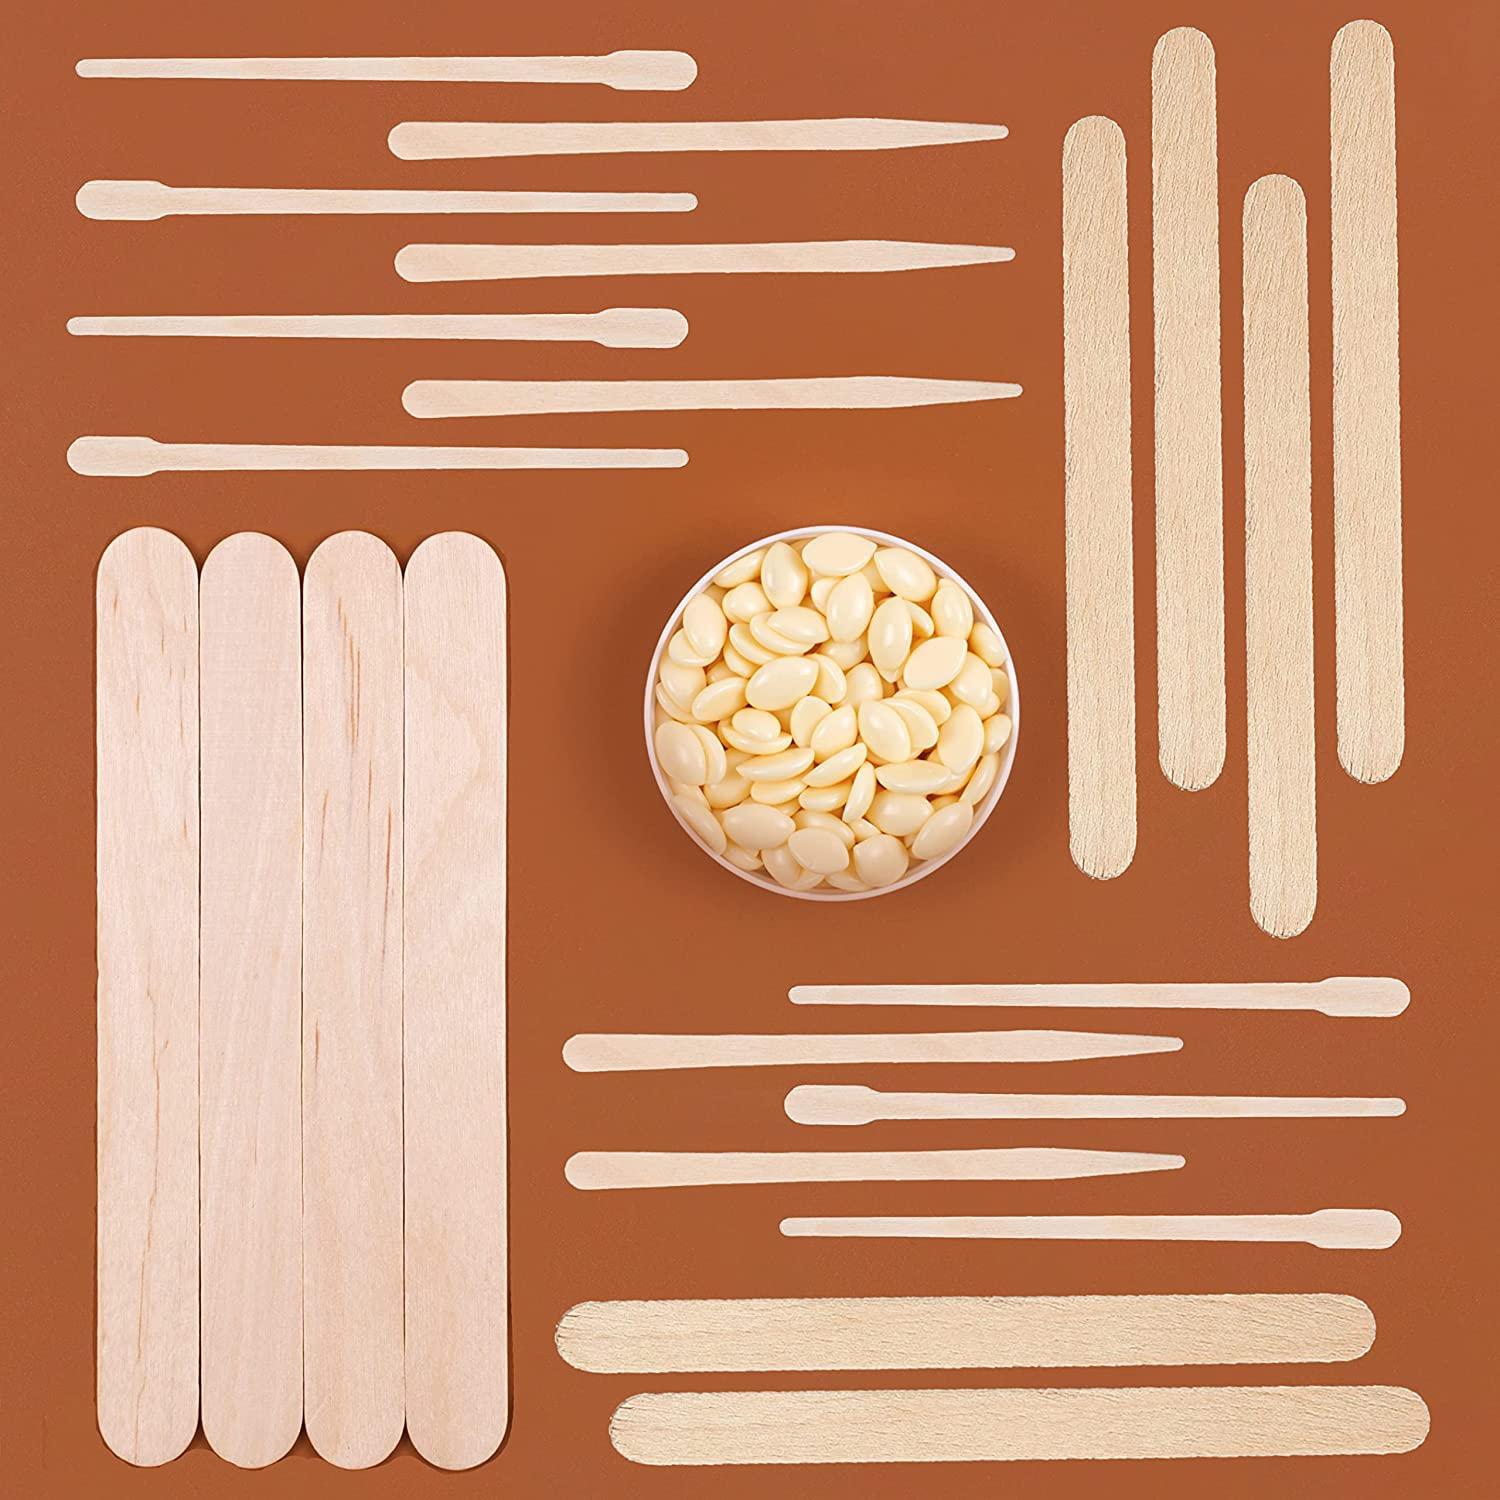  SILMII 100 Pack Large Wax Sticks Wood Waxing Spatulas Wax  Applicators for Body Hair Removal Durable Spatulas Craft Sticks Popsicle  Stick for DIY : Beauty & Personal Care